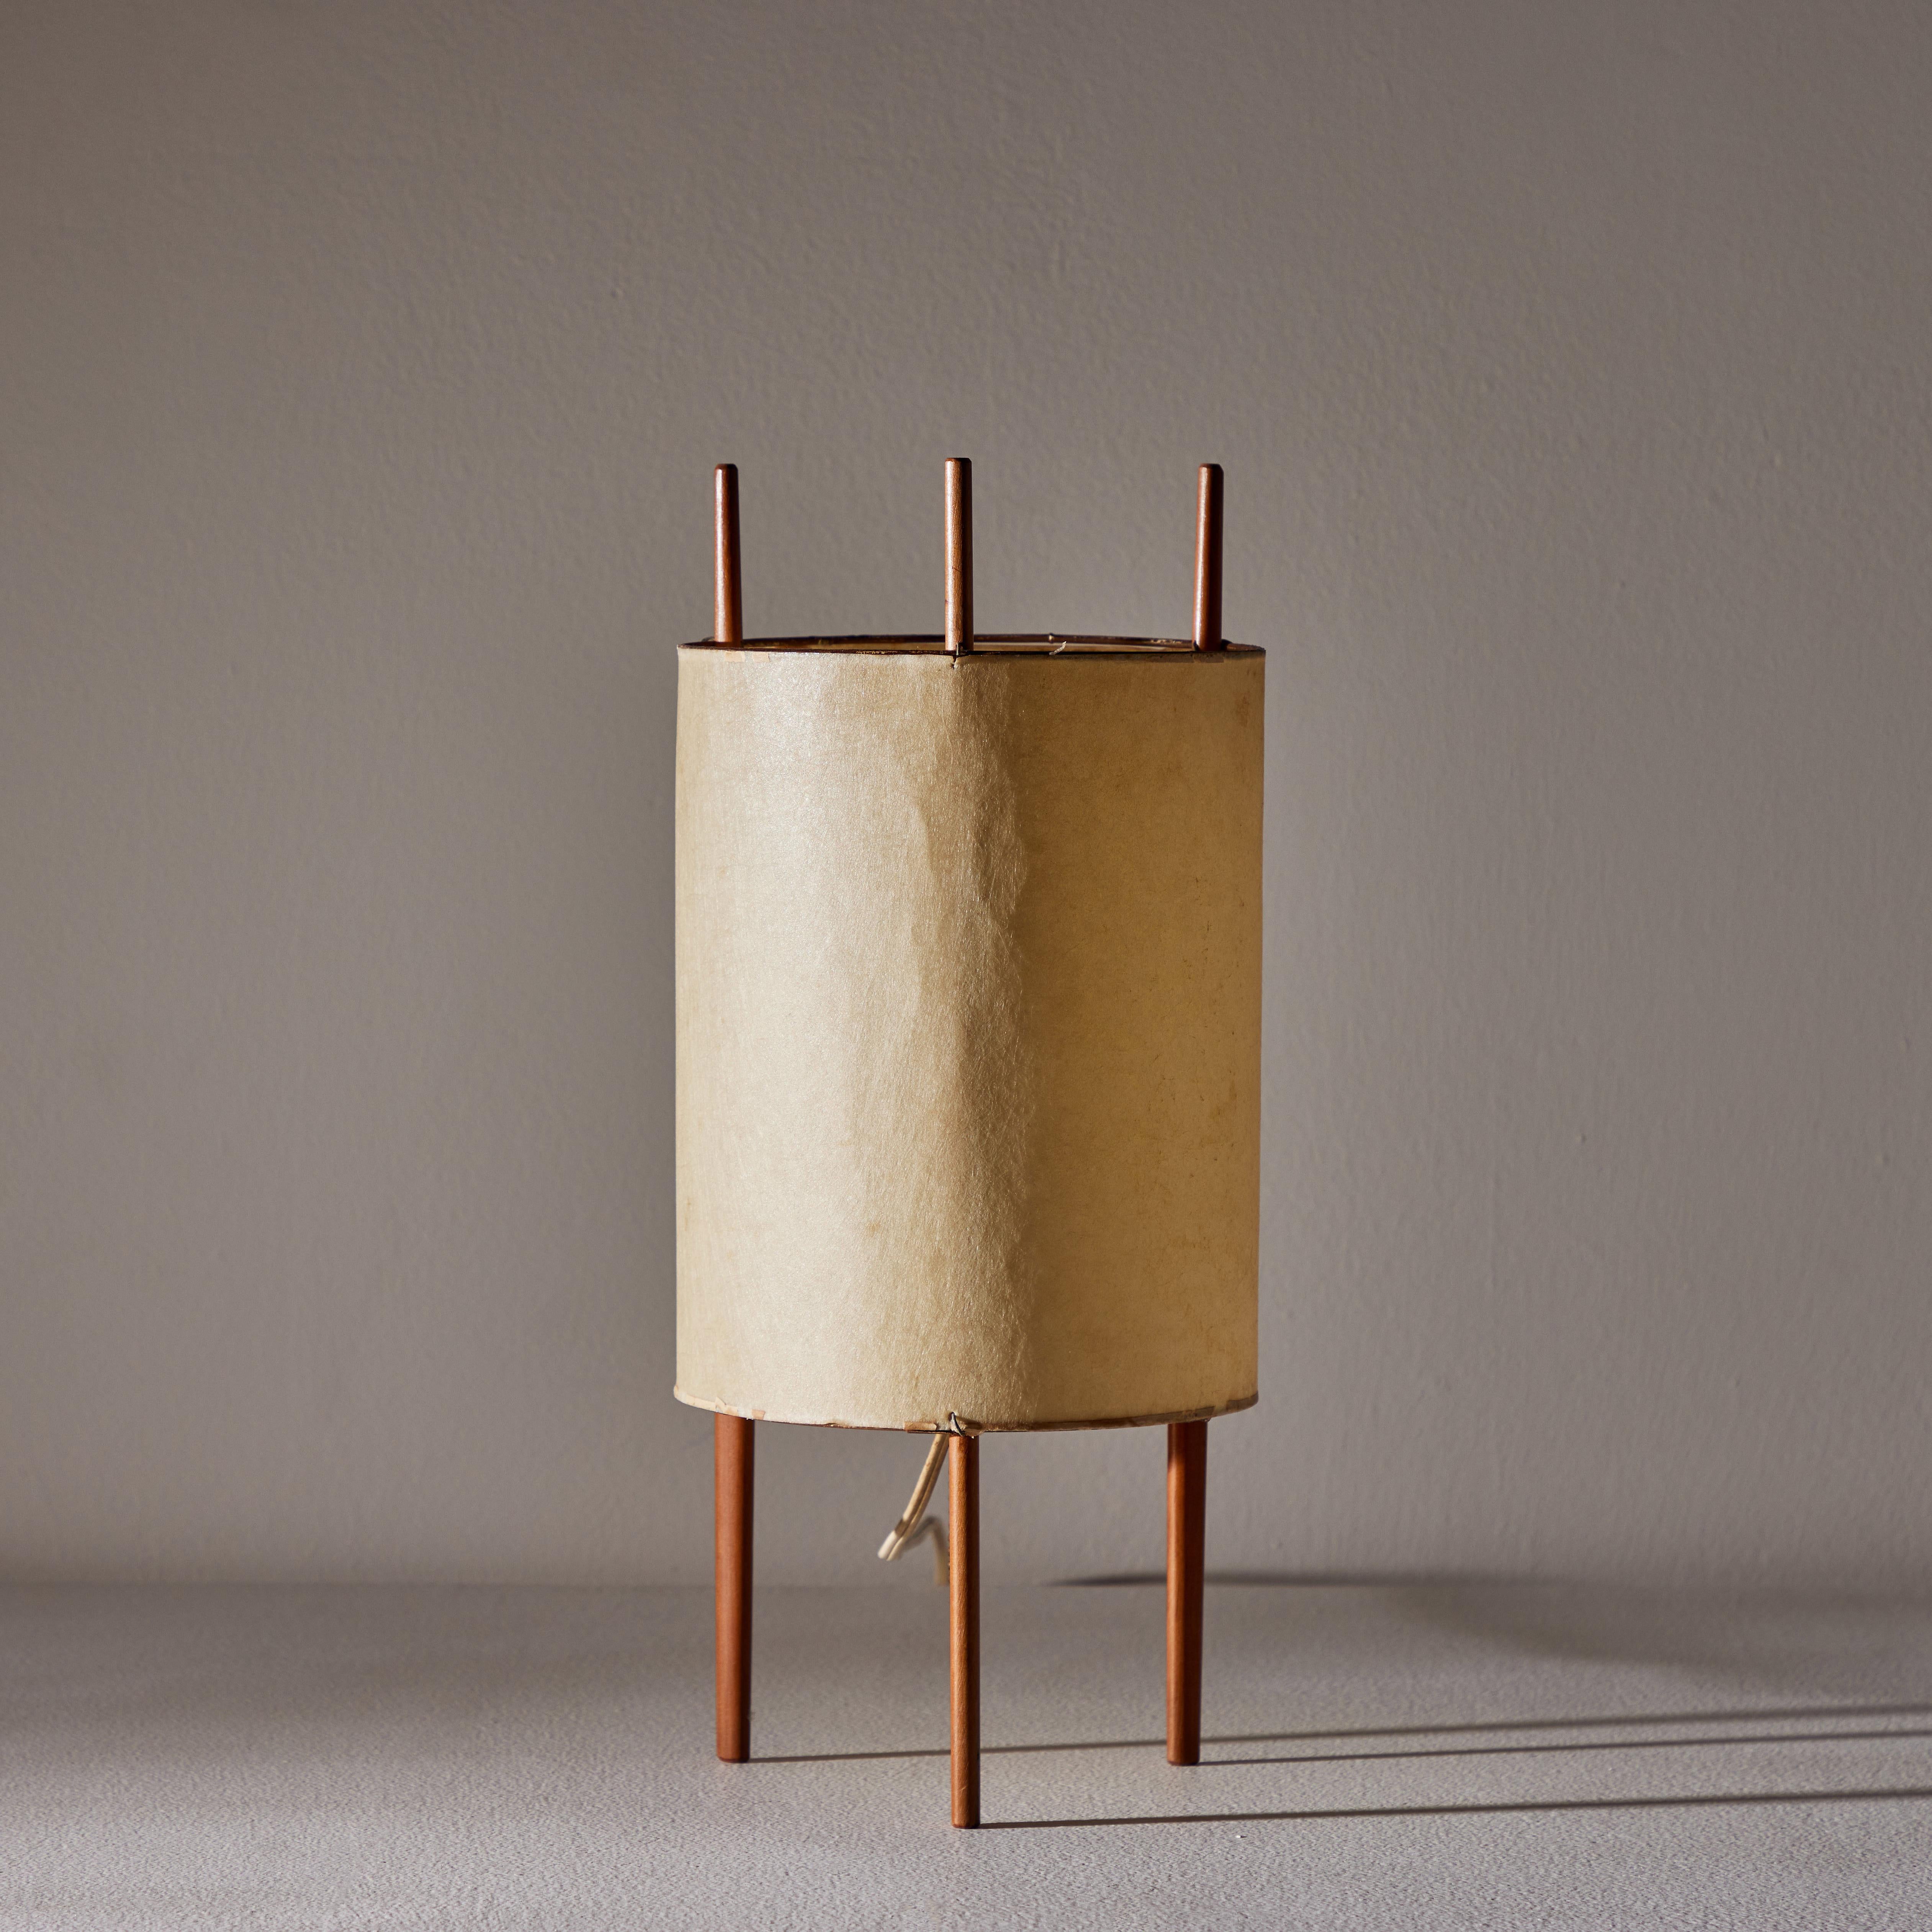 Pair of Table Lamps by Isamu Noguchi for Knoll 1